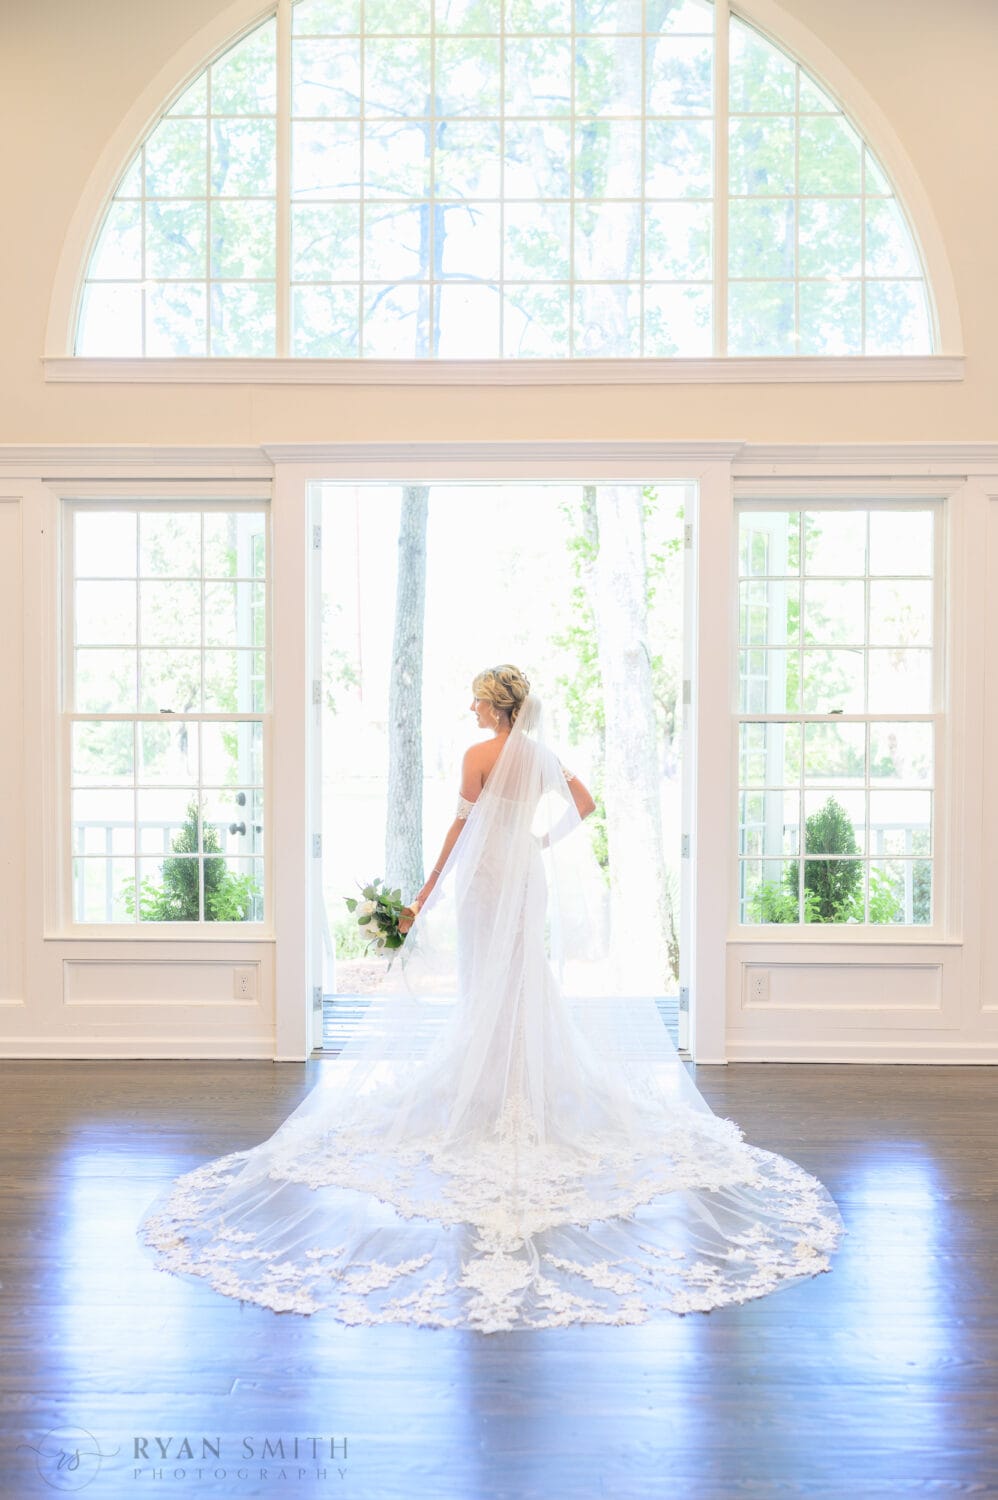 Portraits of the bride in the window light with her dress flowing out behind her - The Village House at Litchfield